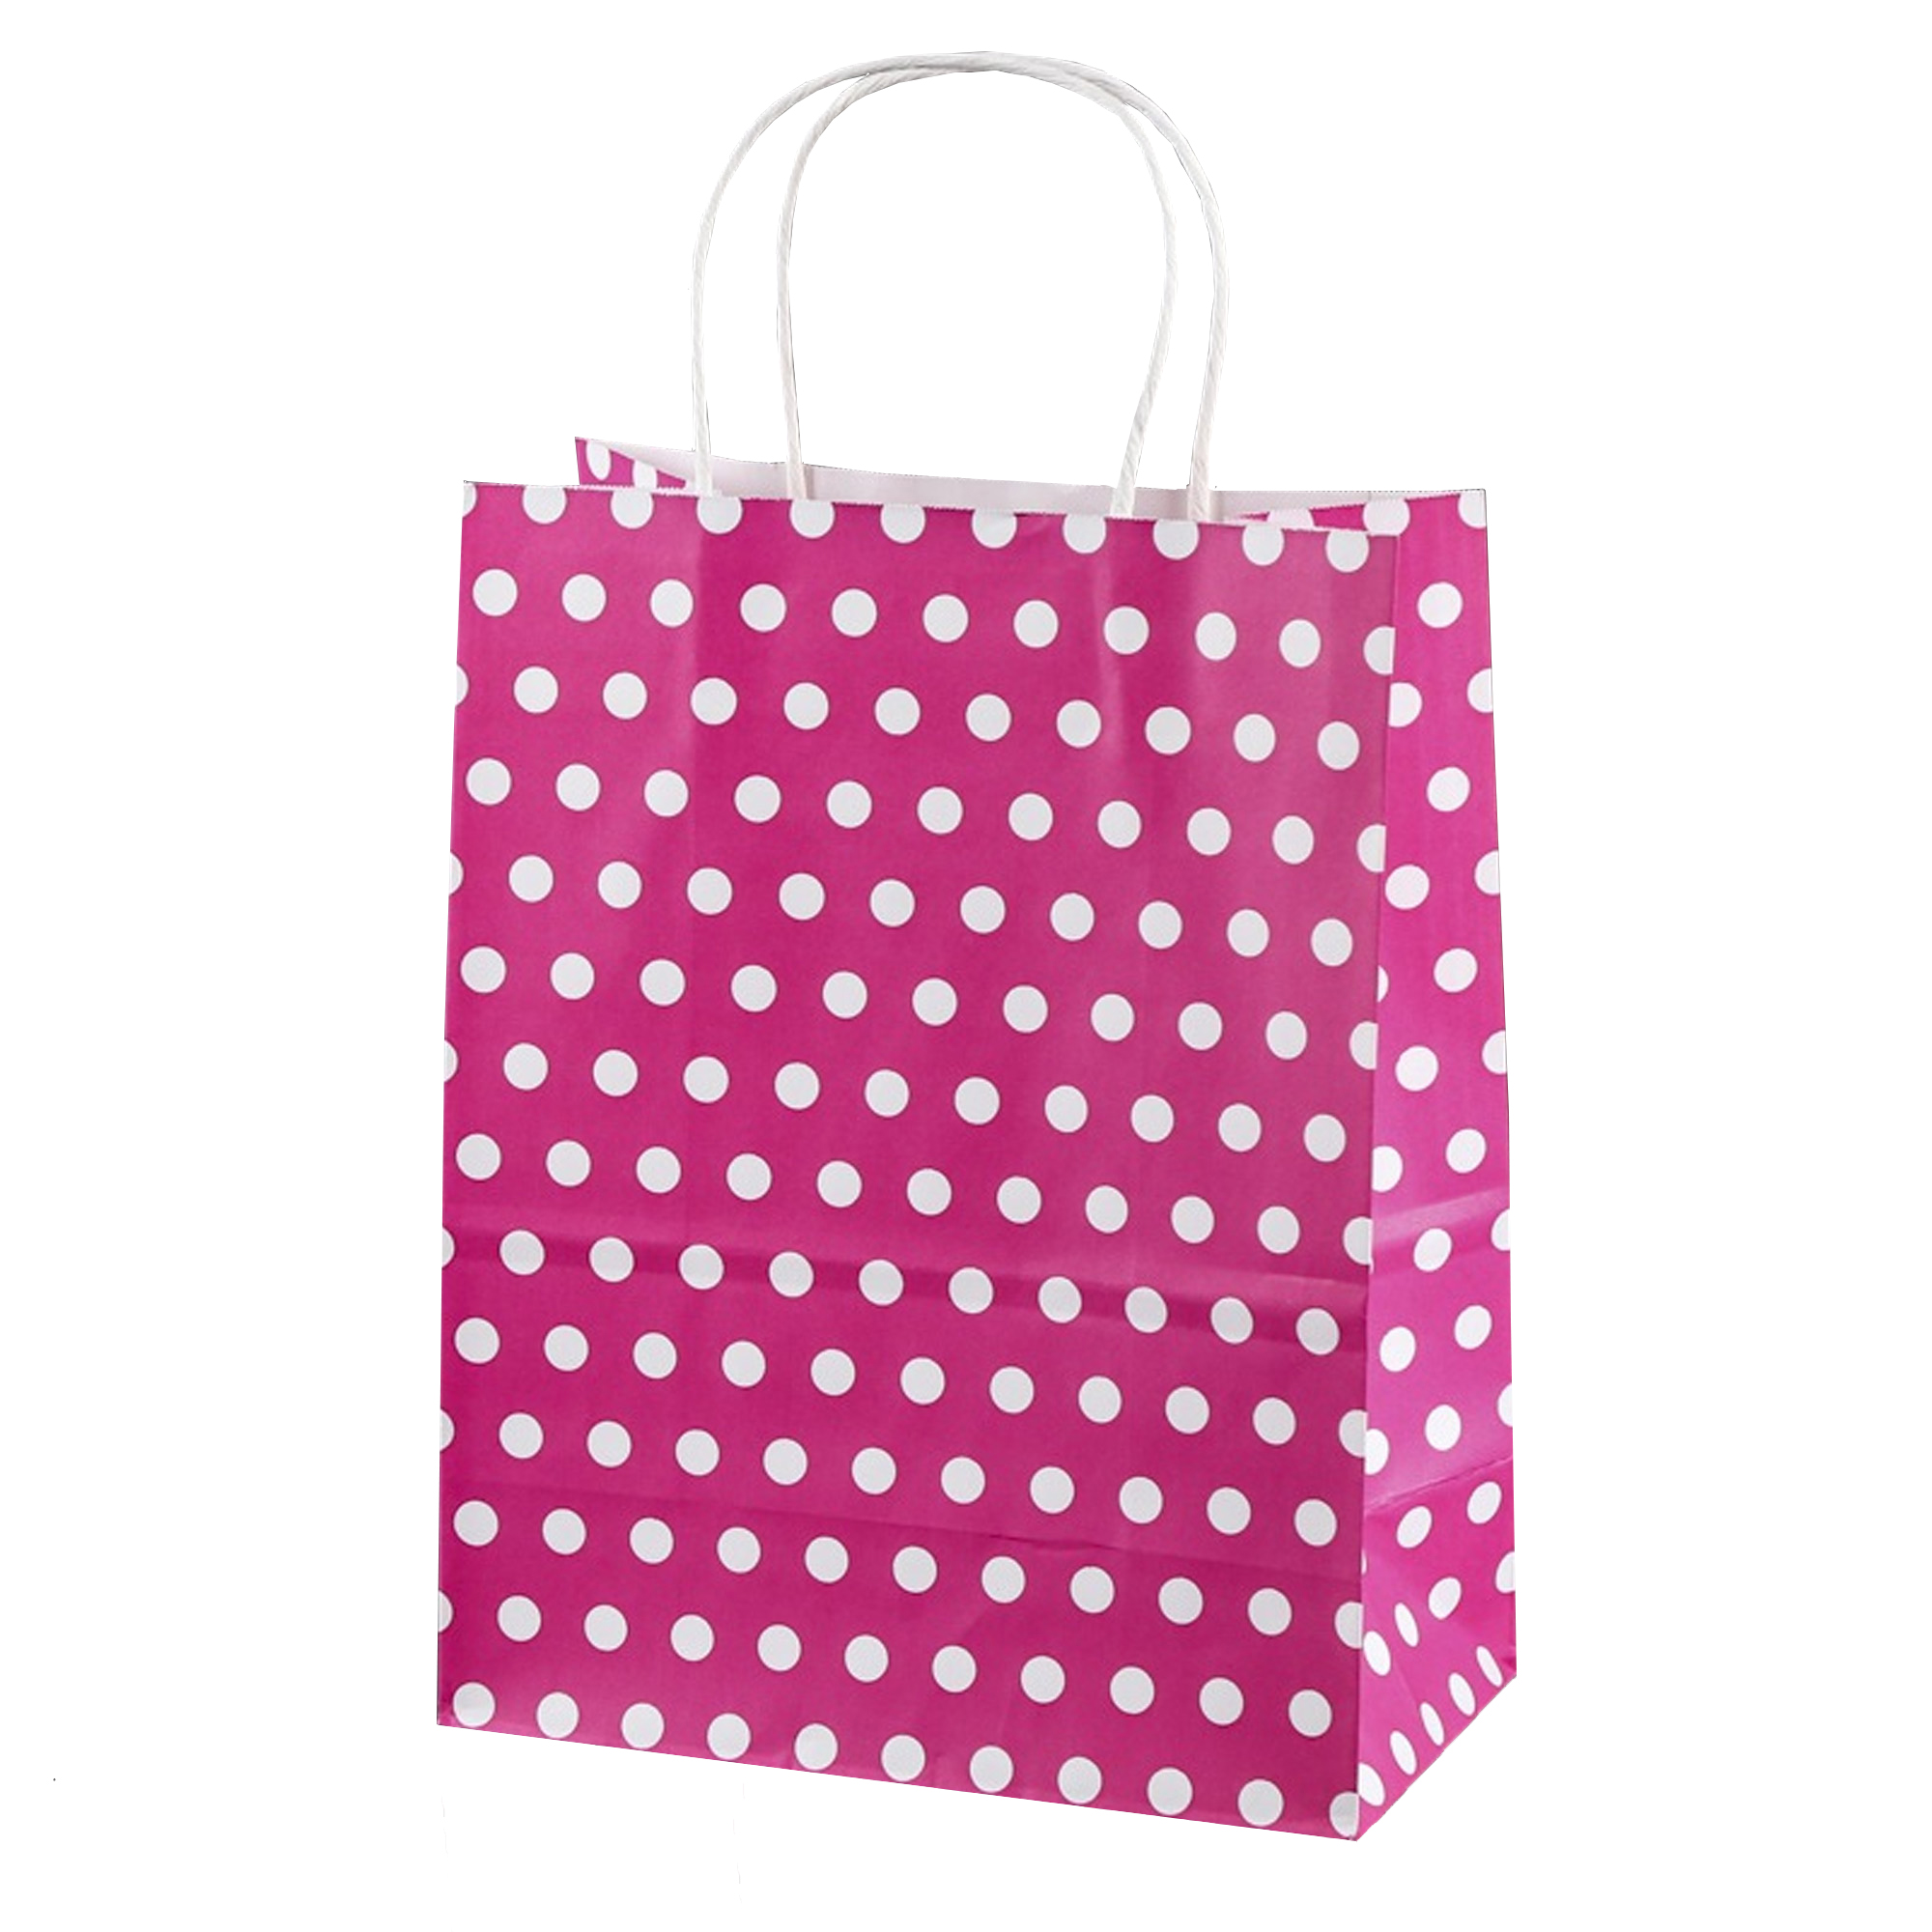 Paper Bags pink white Dots Candy Bar Wedding Pastel Bags birthday Polka Dots give away Candybag